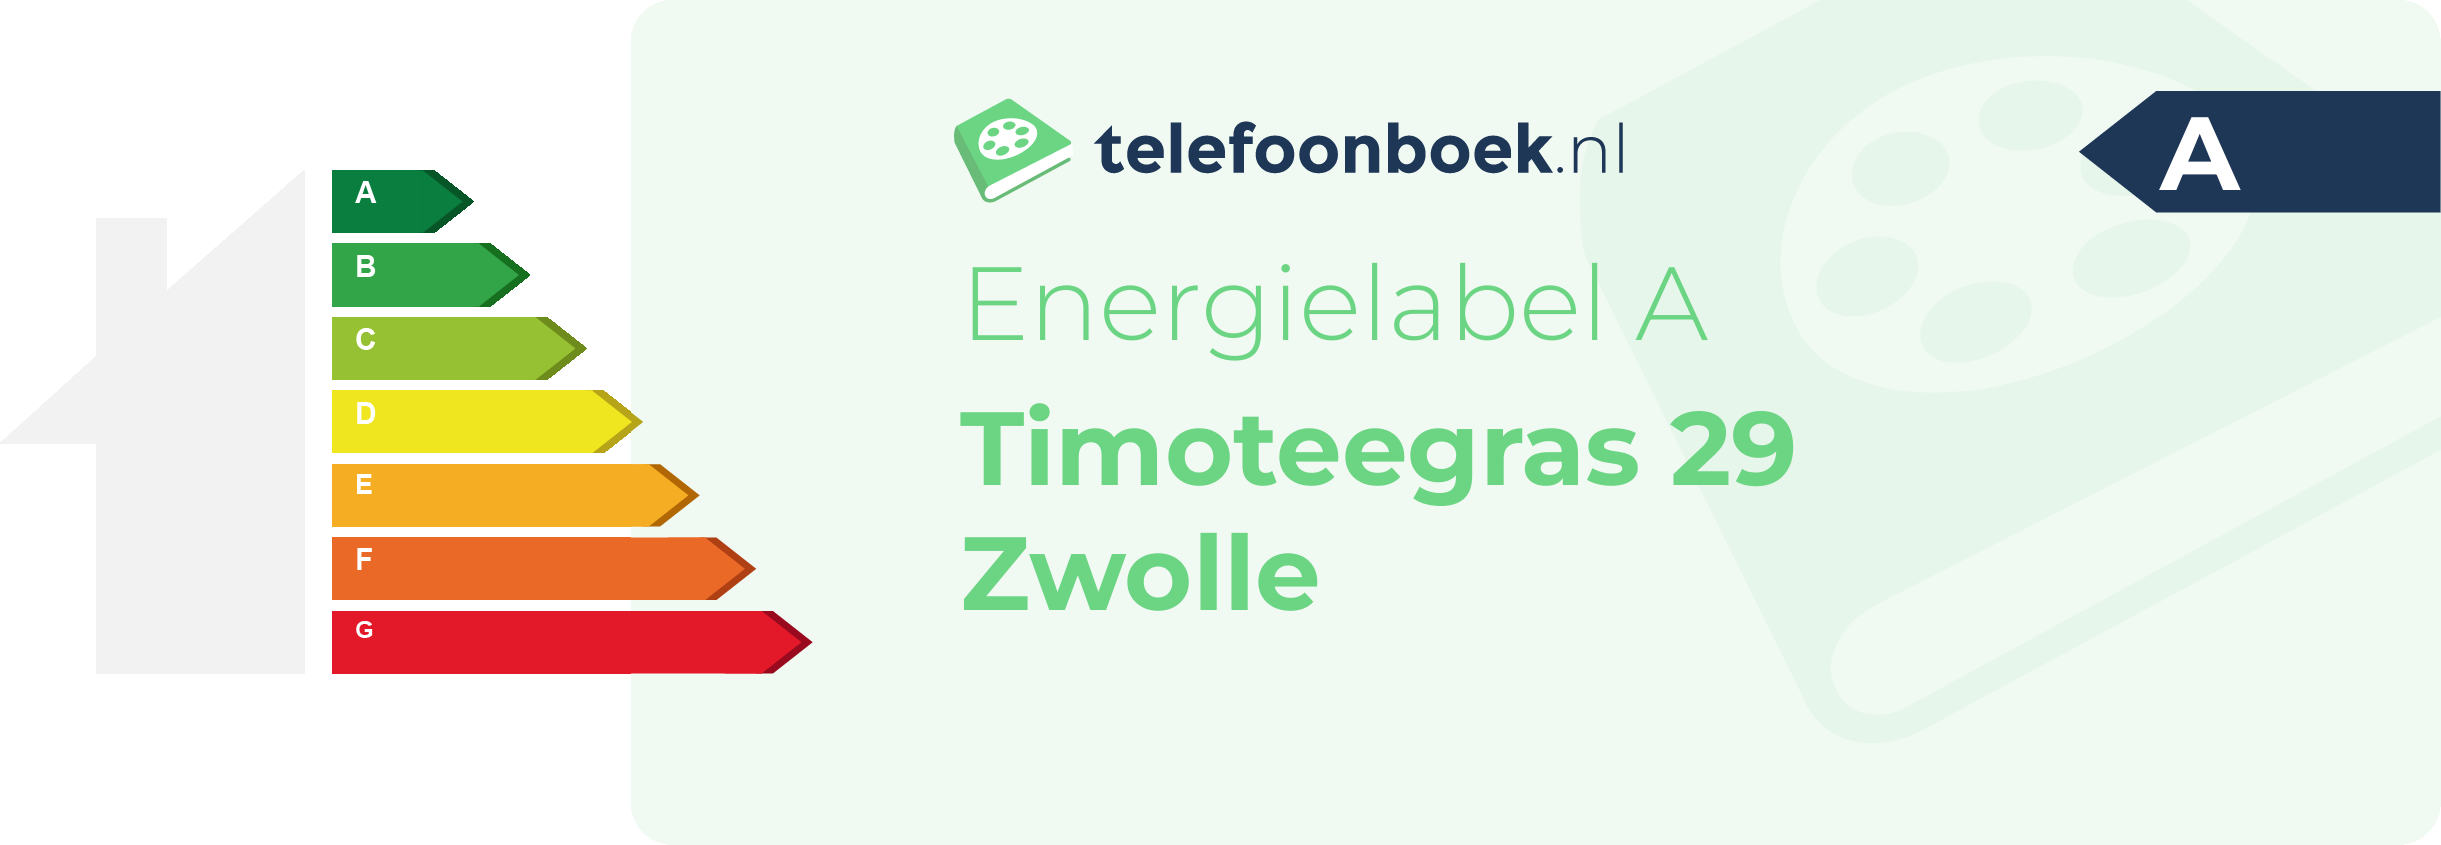 Energielabel Timoteegras 29 Zwolle